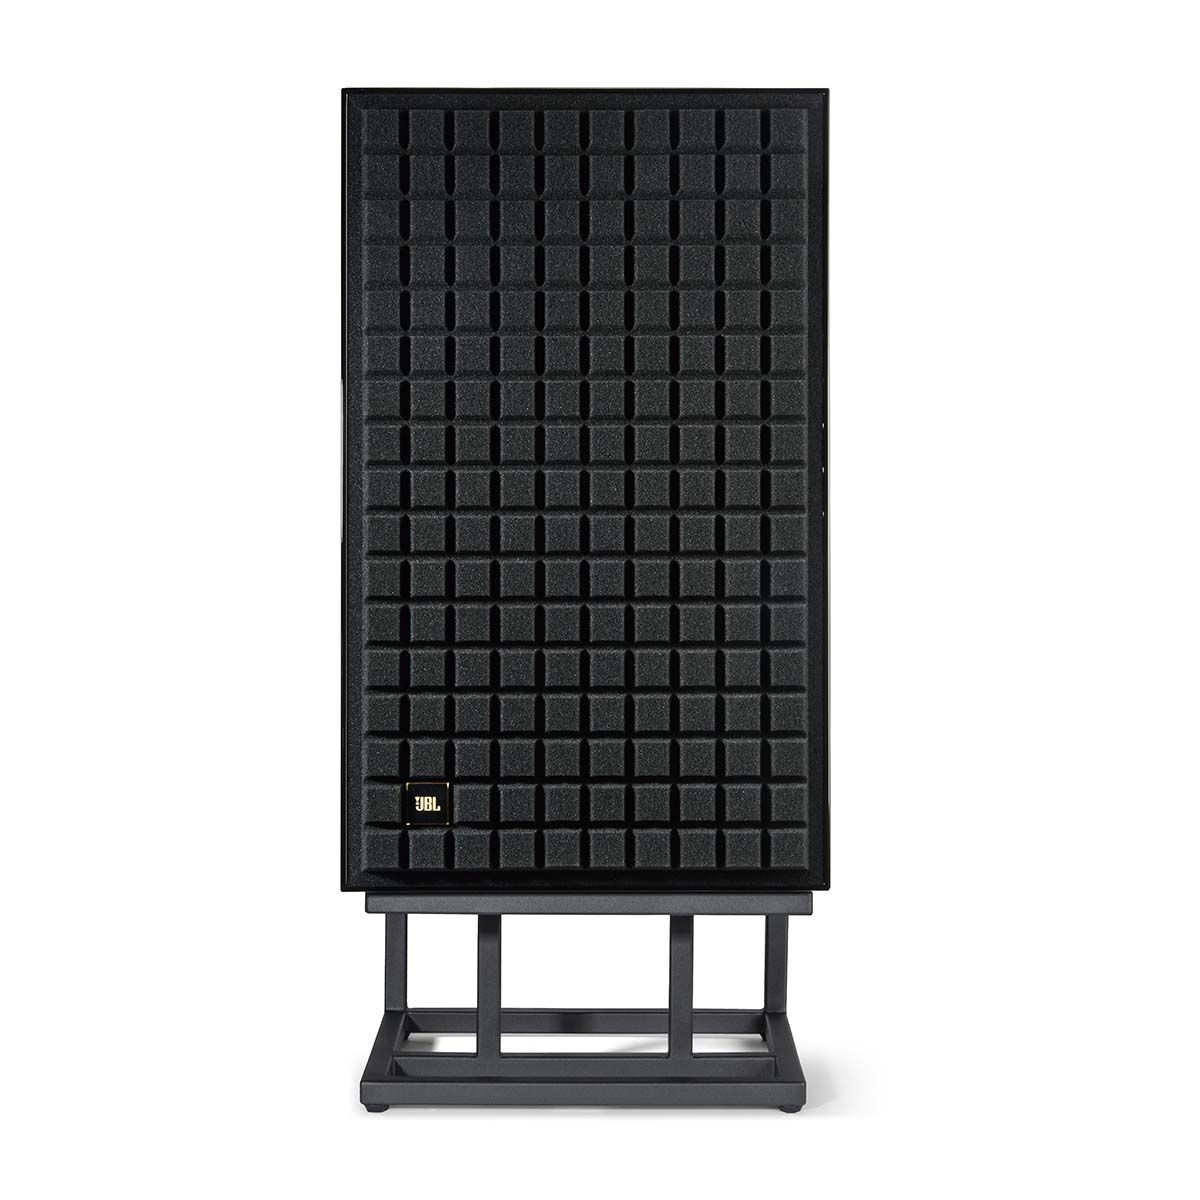 JBL L100 Classic Bookshelf Speaker - Limited Edition Gloss Black front view of single speaker on JS120 stand with grille